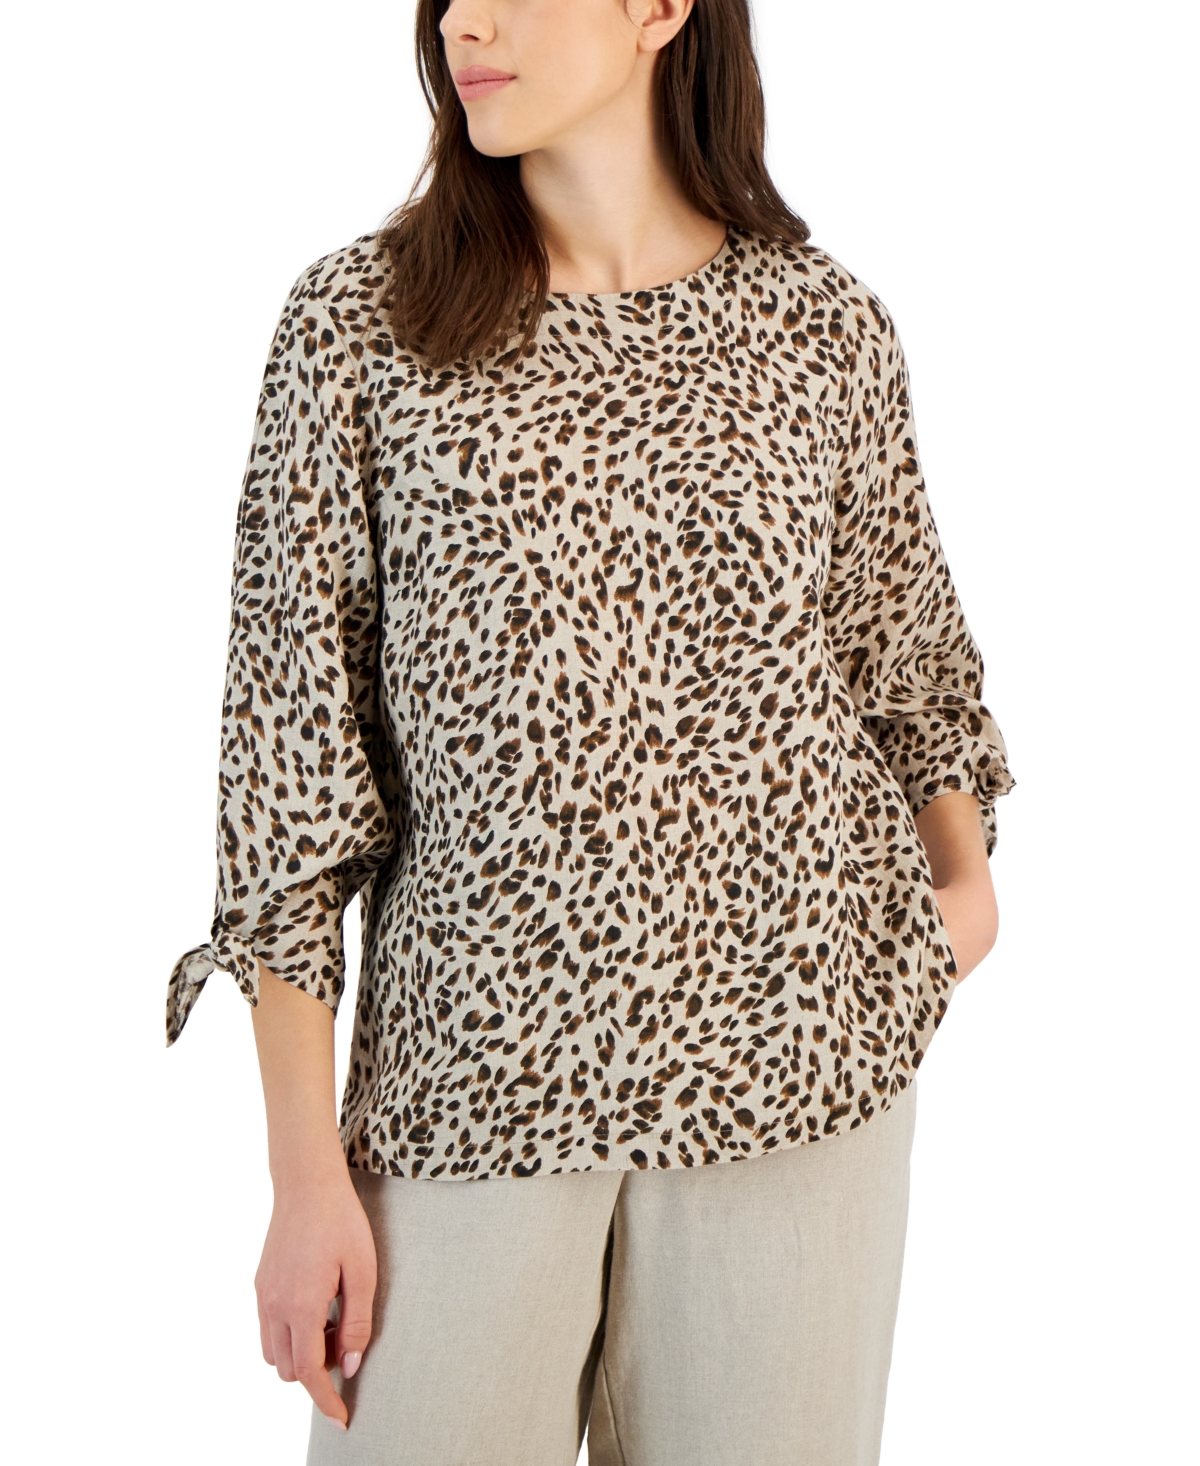 Women's 100% Linen Animal-Print Tie-Cuff Top, Created for Macy's - Flax Combo